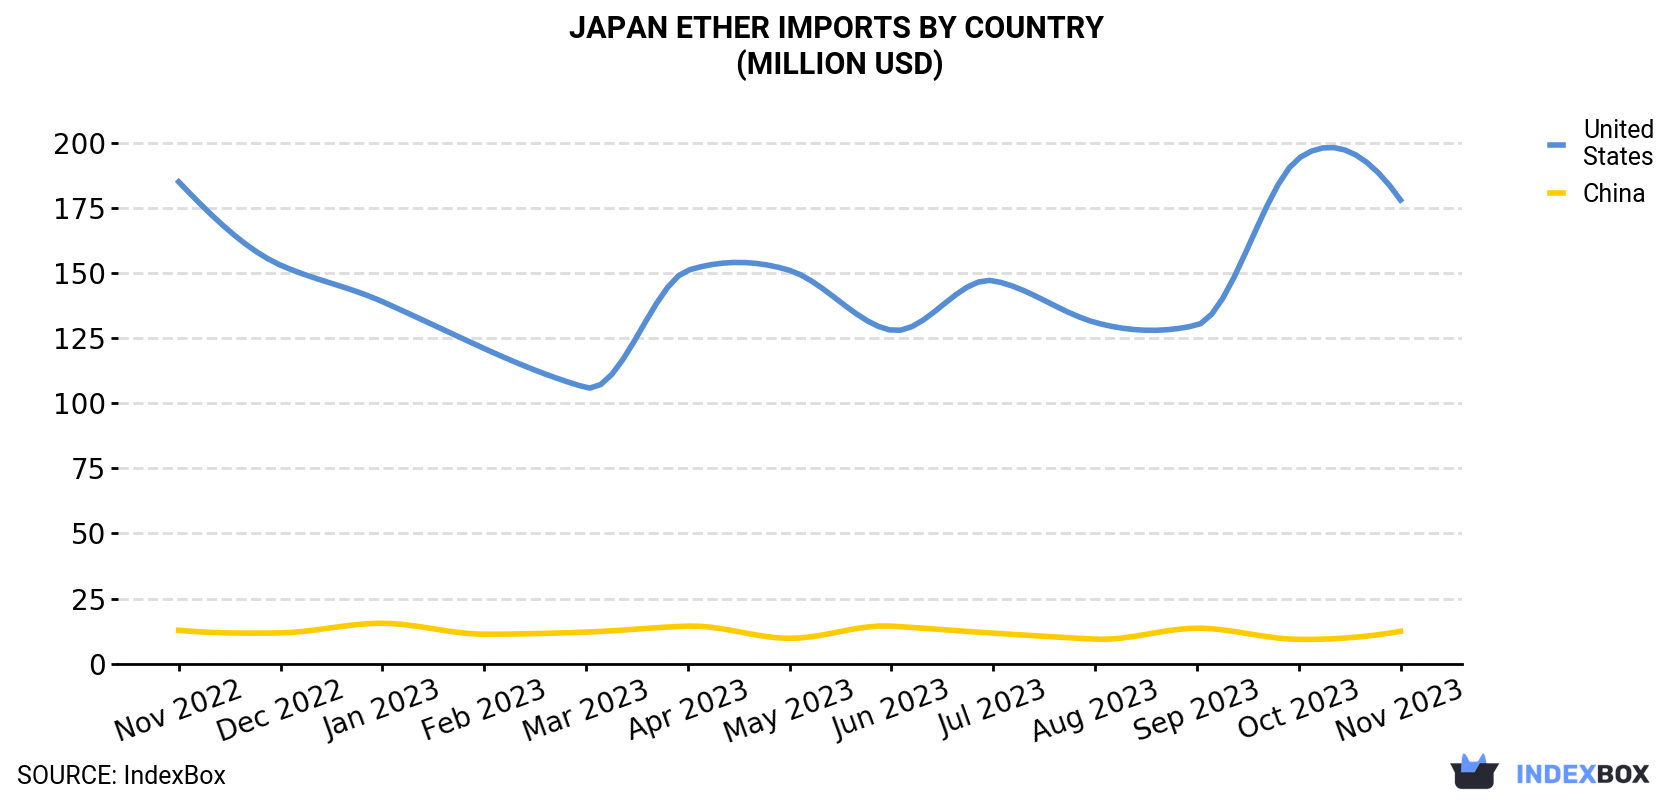 Japan Ether Imports By Country (Million USD)